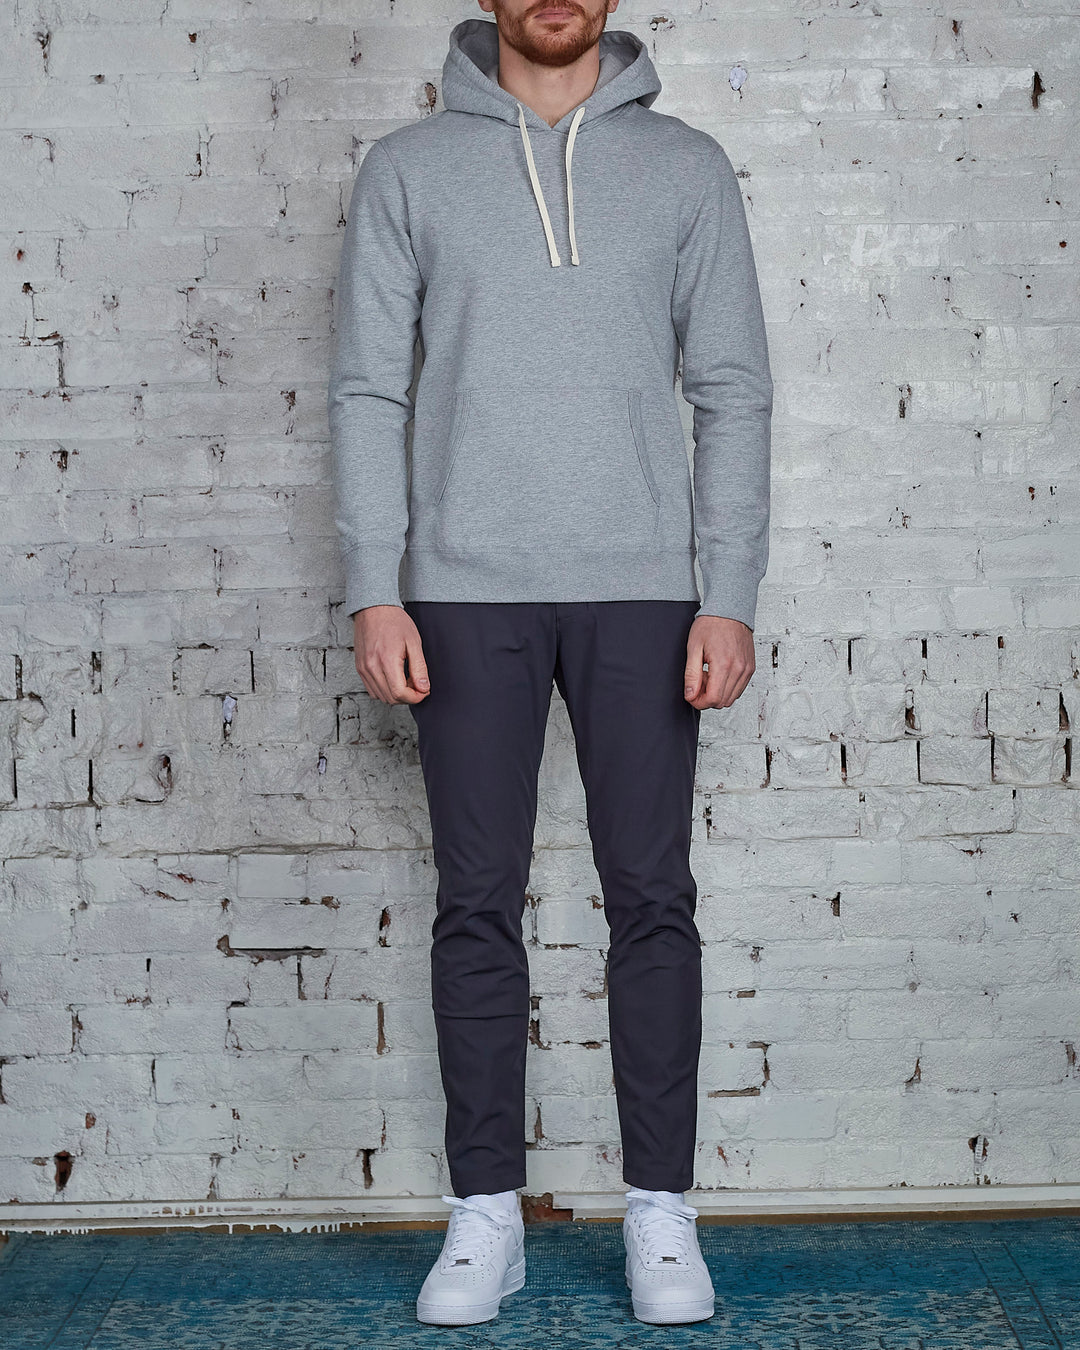 Reigning Champ Core Pullover Hood Heather Grey